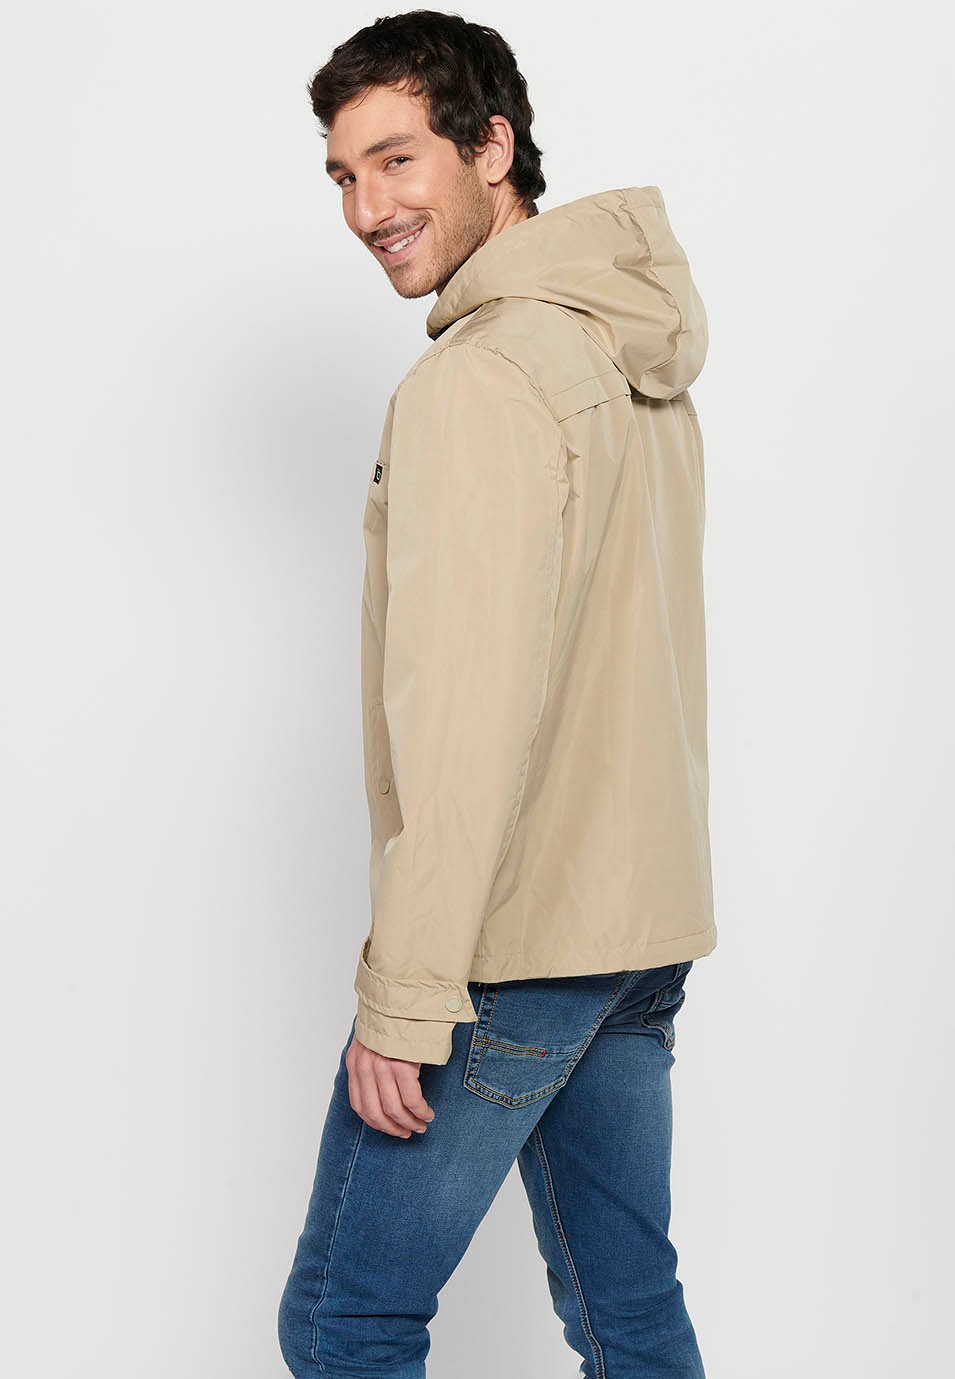 Water Repellent Jacket with Hooded Collar and Front Zipper Closure, Beige Pockets for Men 1